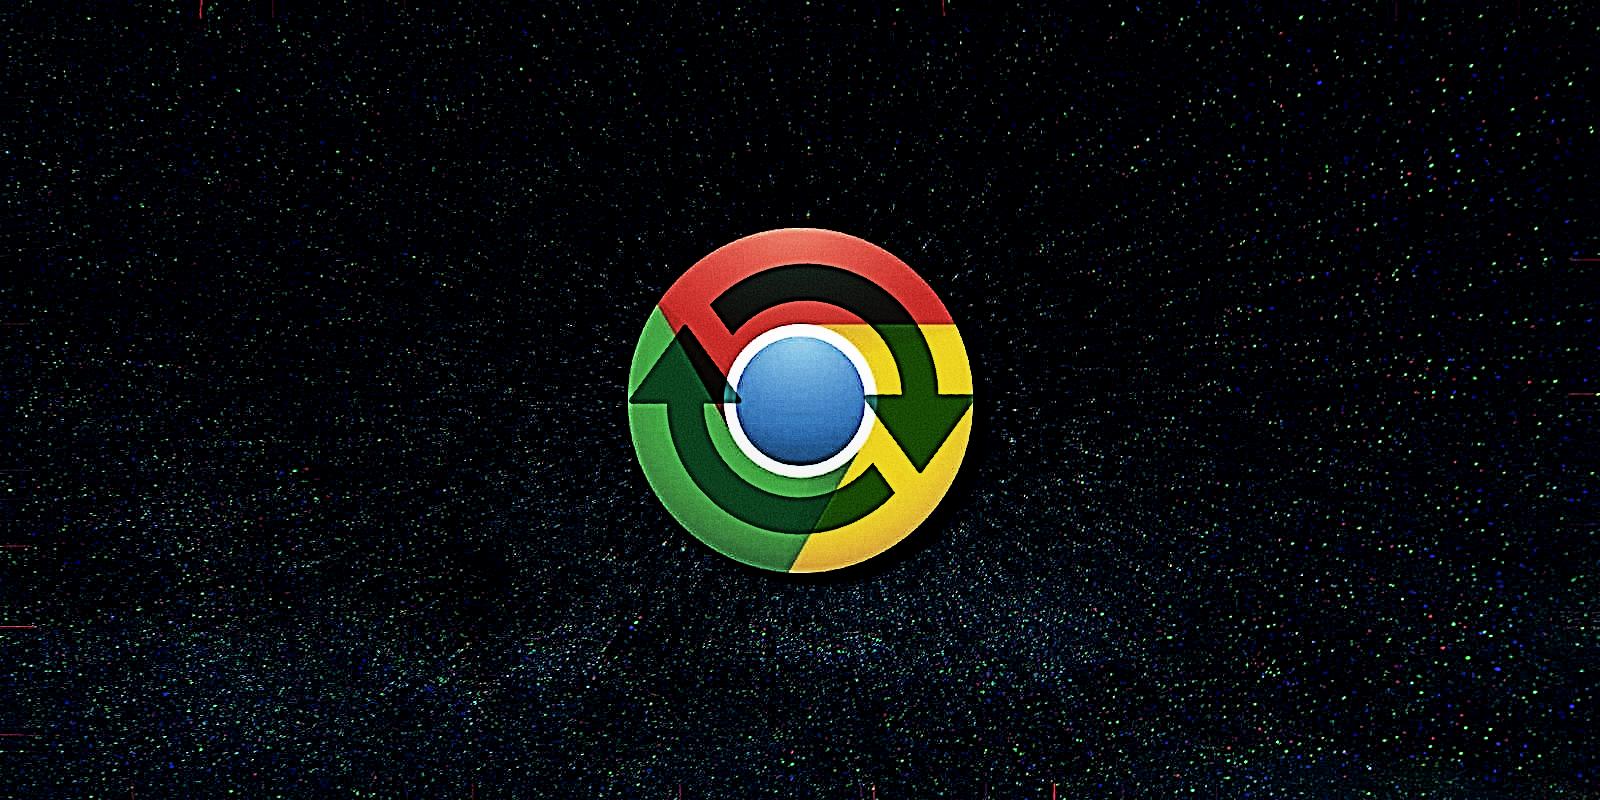 Malicious extension abuses Chrome sync to steal users' data